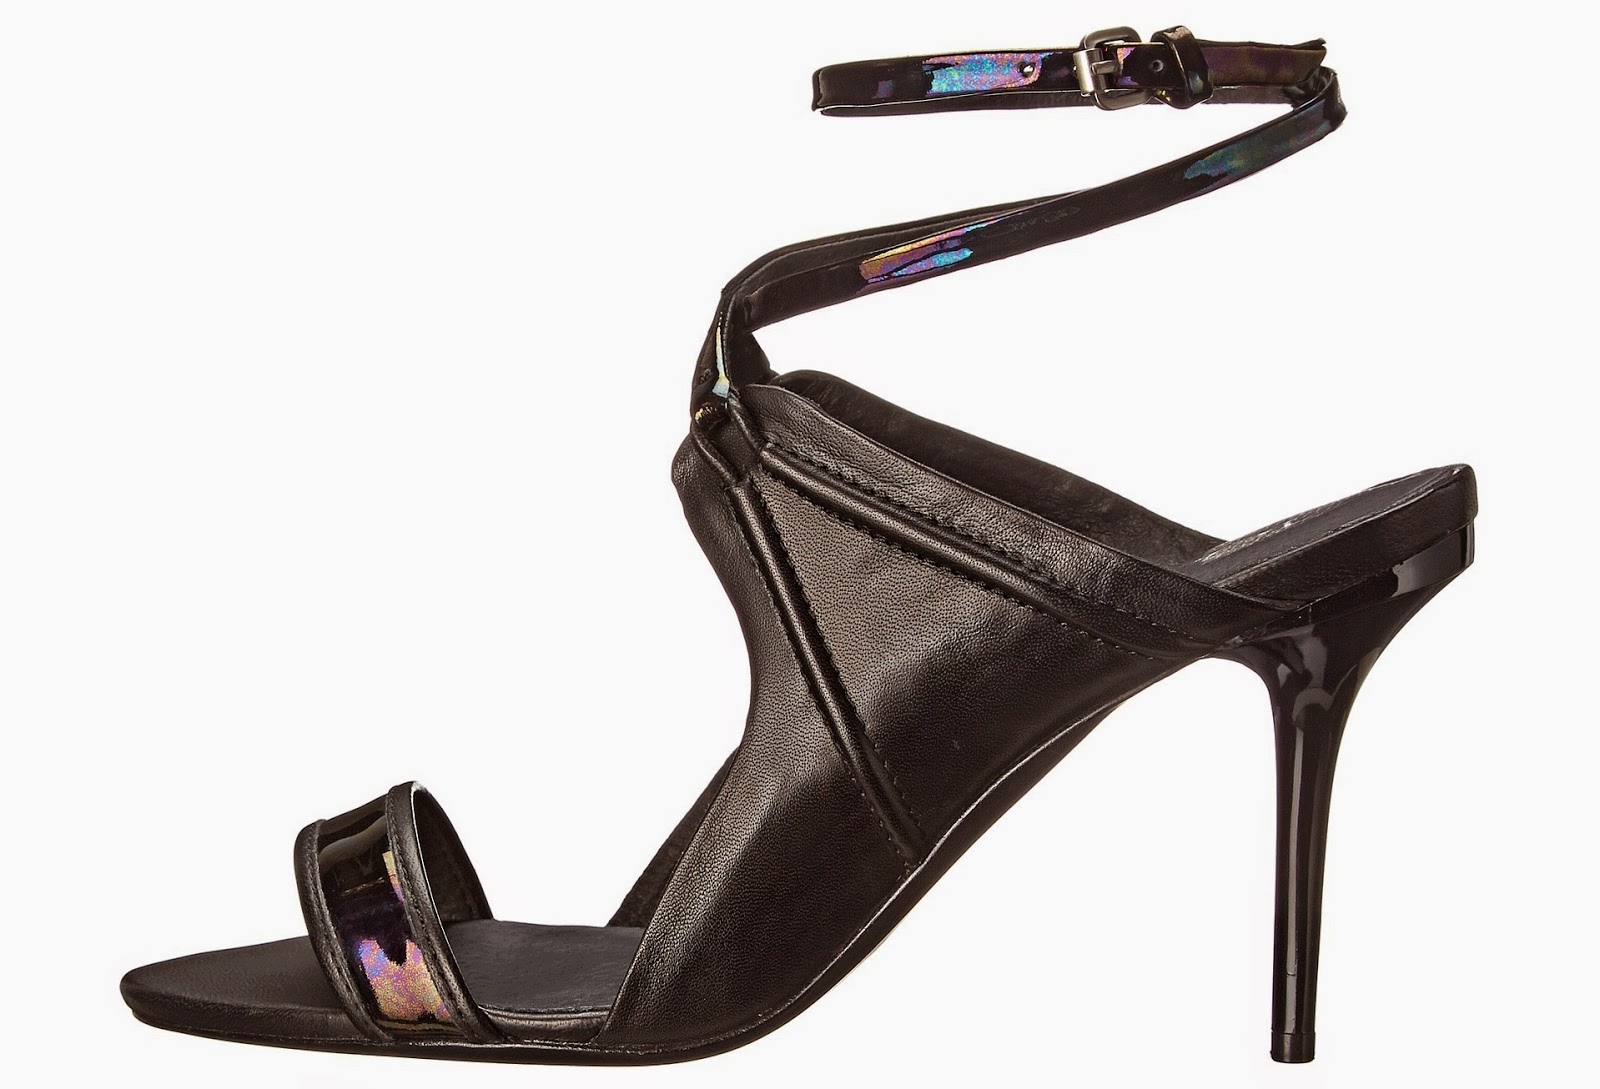 Shoe of the Day | L.A.M.B. Bambi Pumps | SHOEOGRAPHY